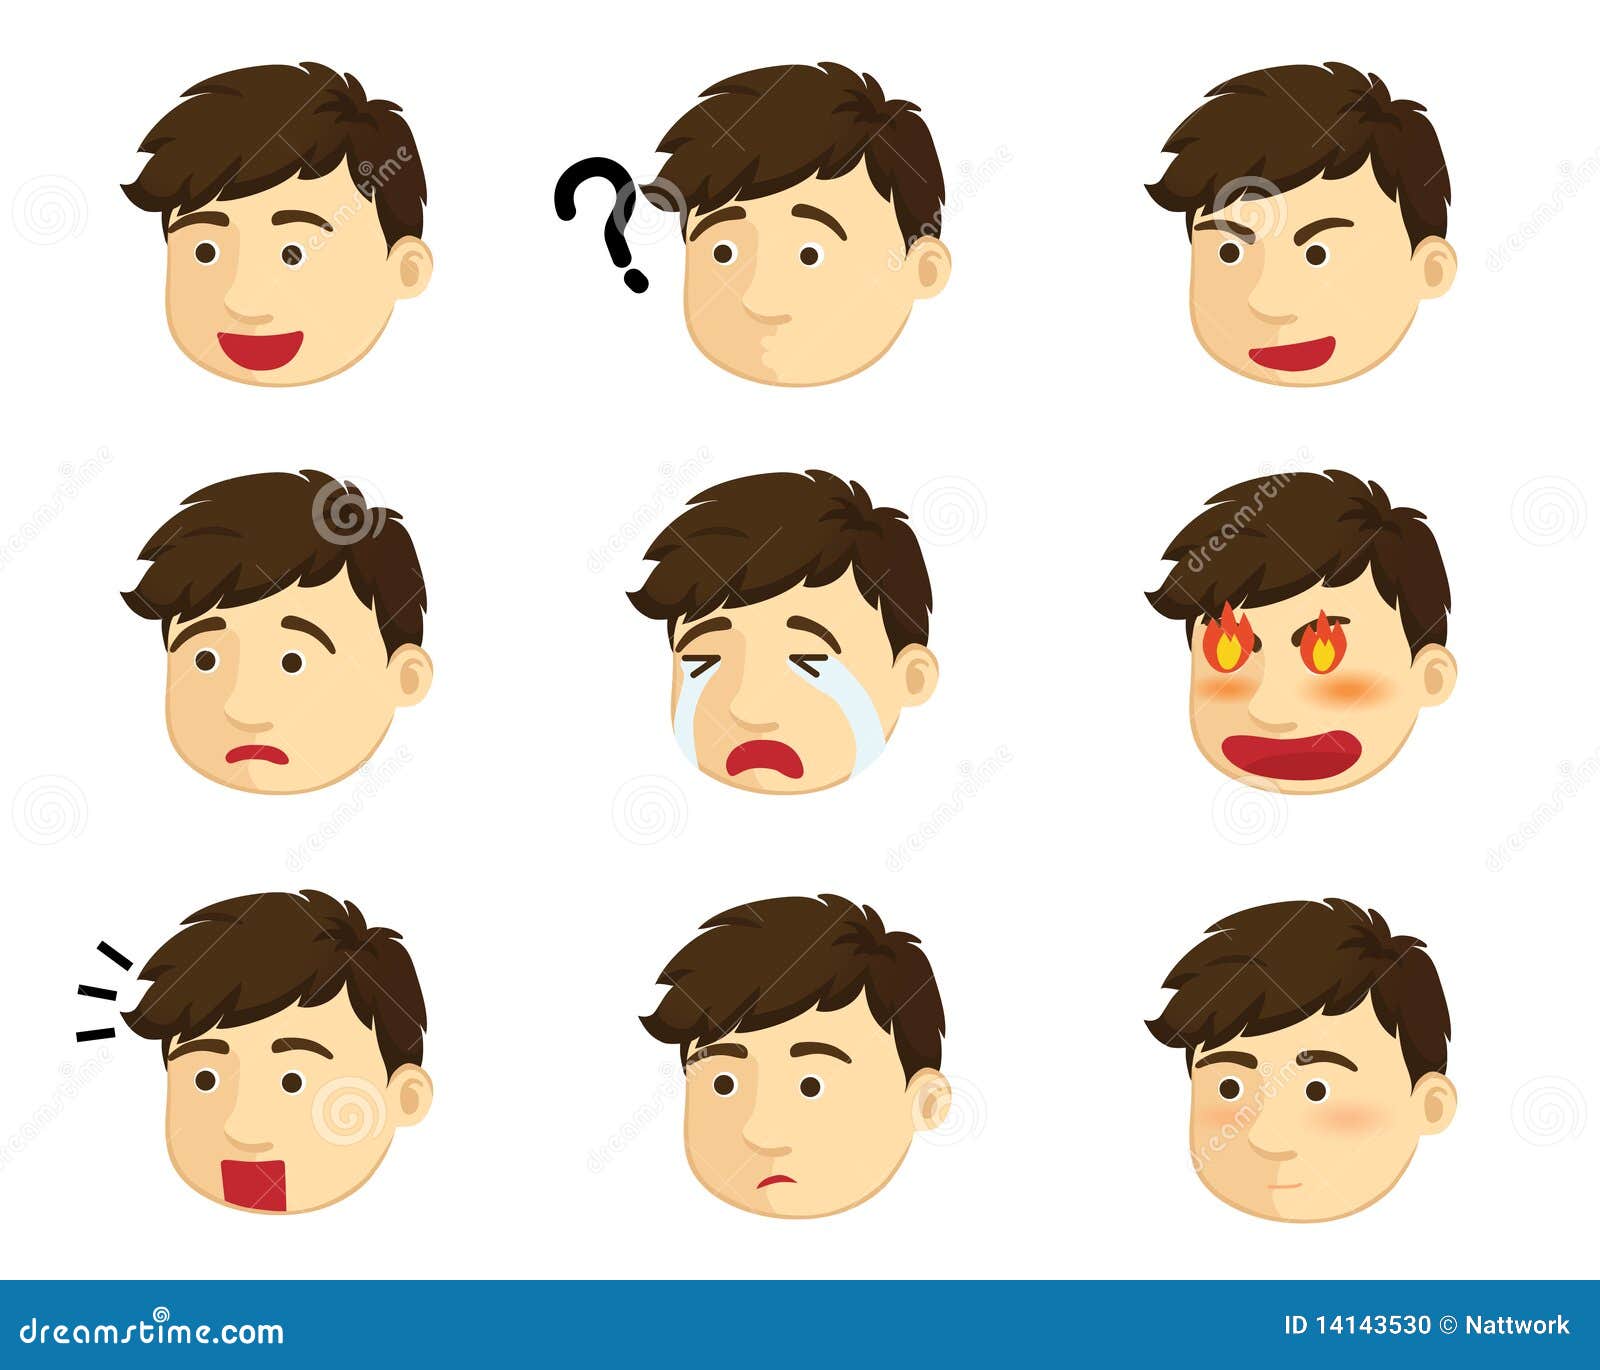 clipart of different emotions - photo #14